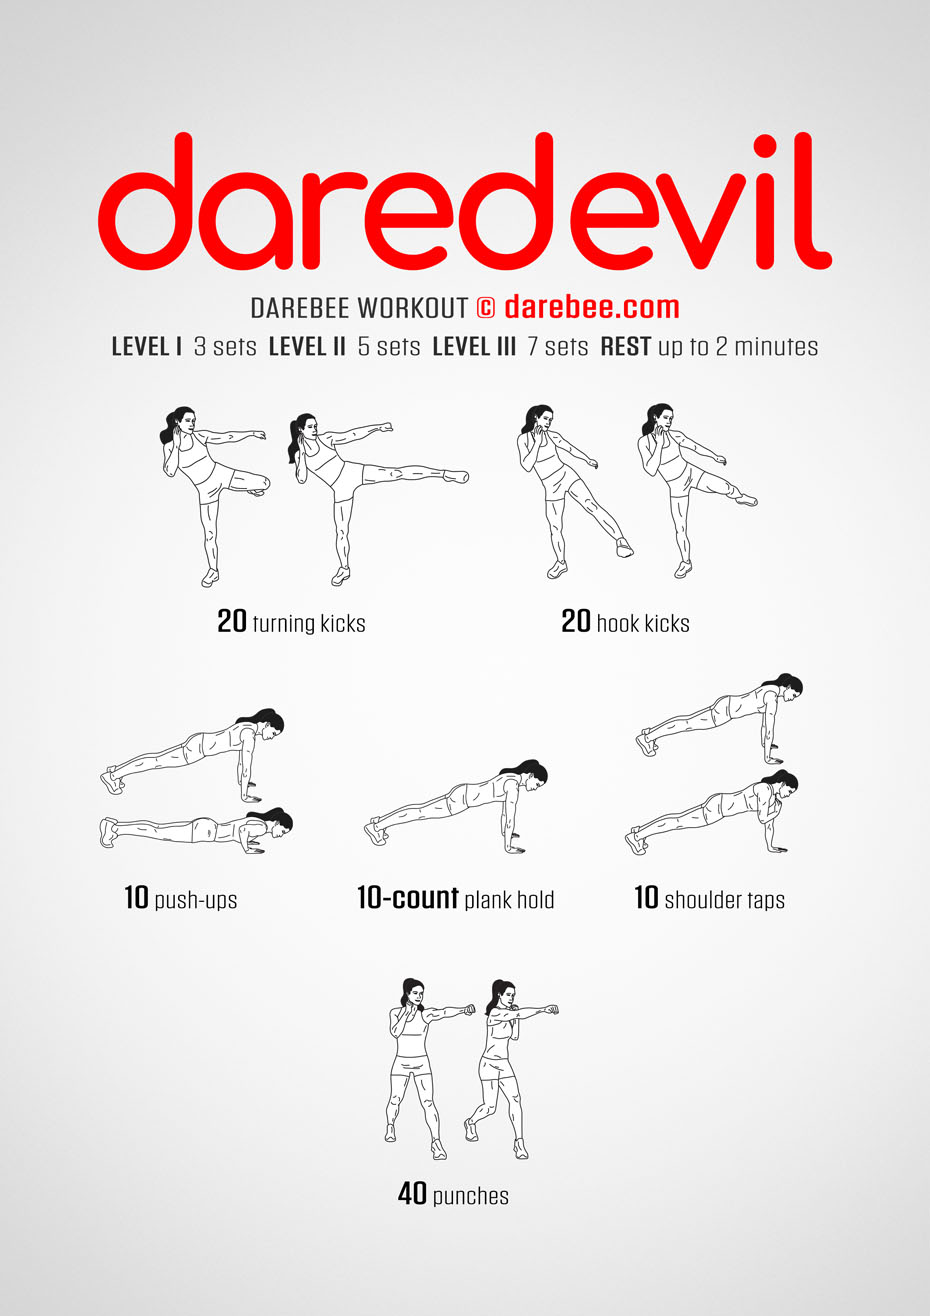 Daredevil is a combat-moves based workout that will help your entire body become more coordinated, it will improve your balance and train your brain.